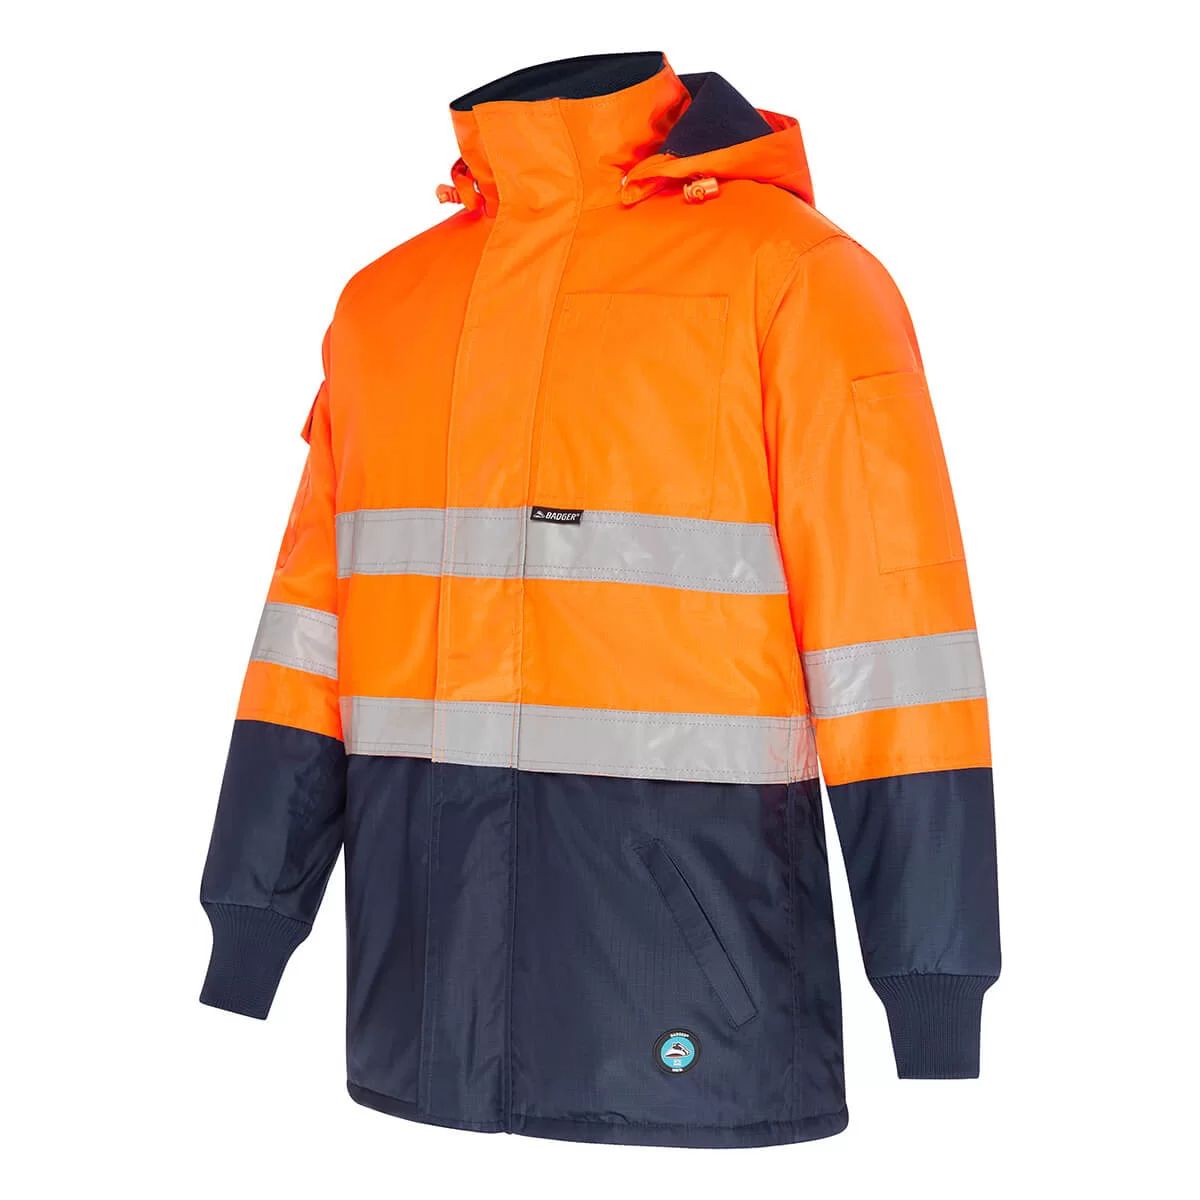 Badger Winta Industry Jacket - Xtreme Products